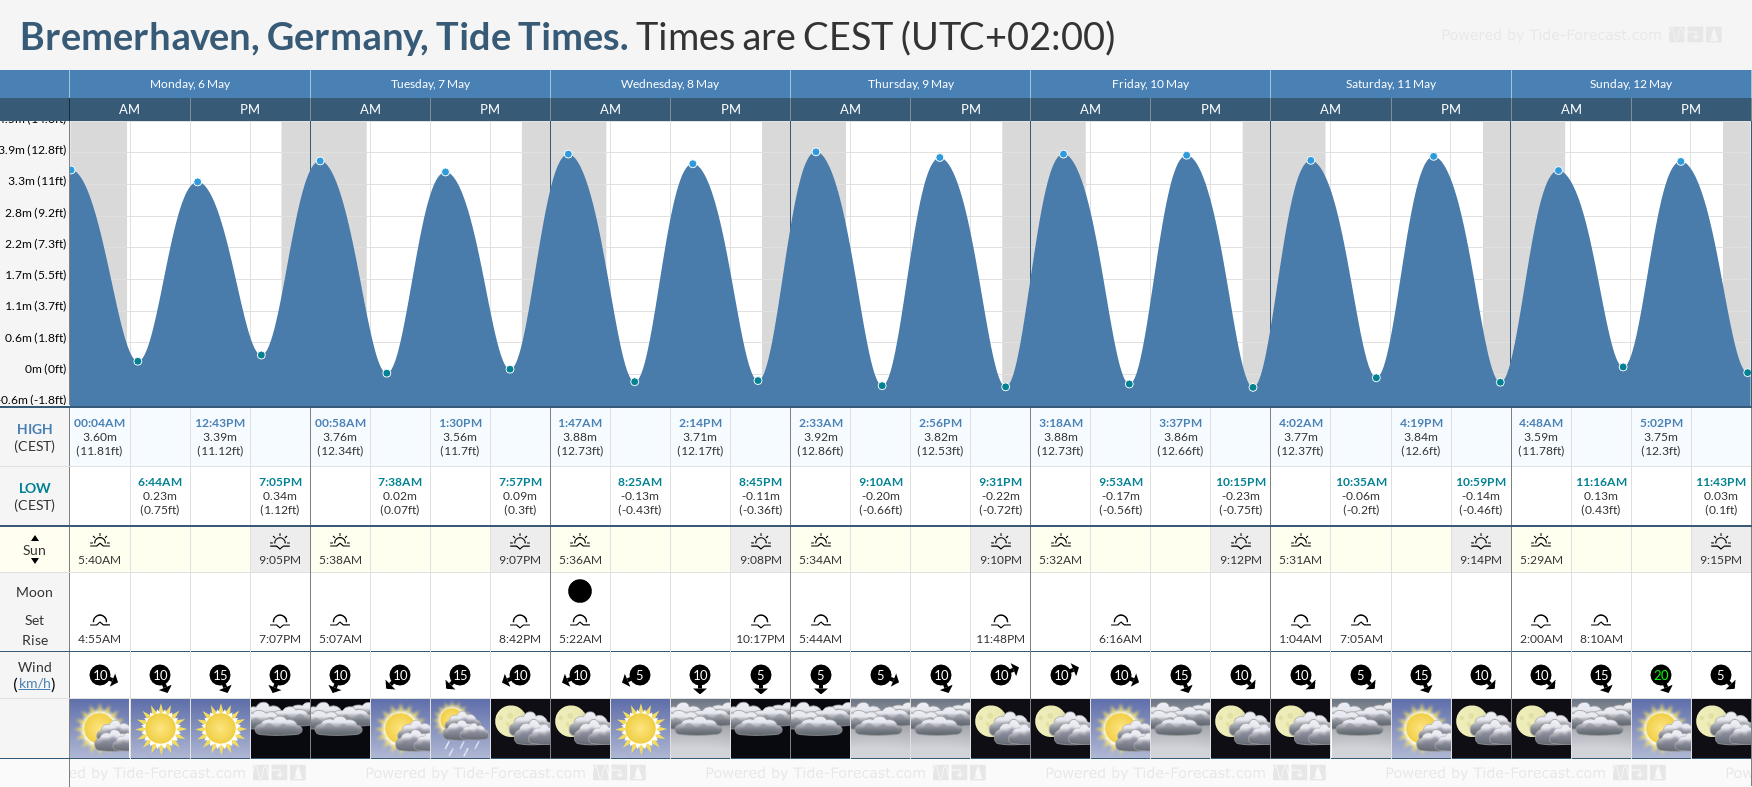 Bremerhaven, Germany Tide Chart including high and low tide tide times for the next 7 days